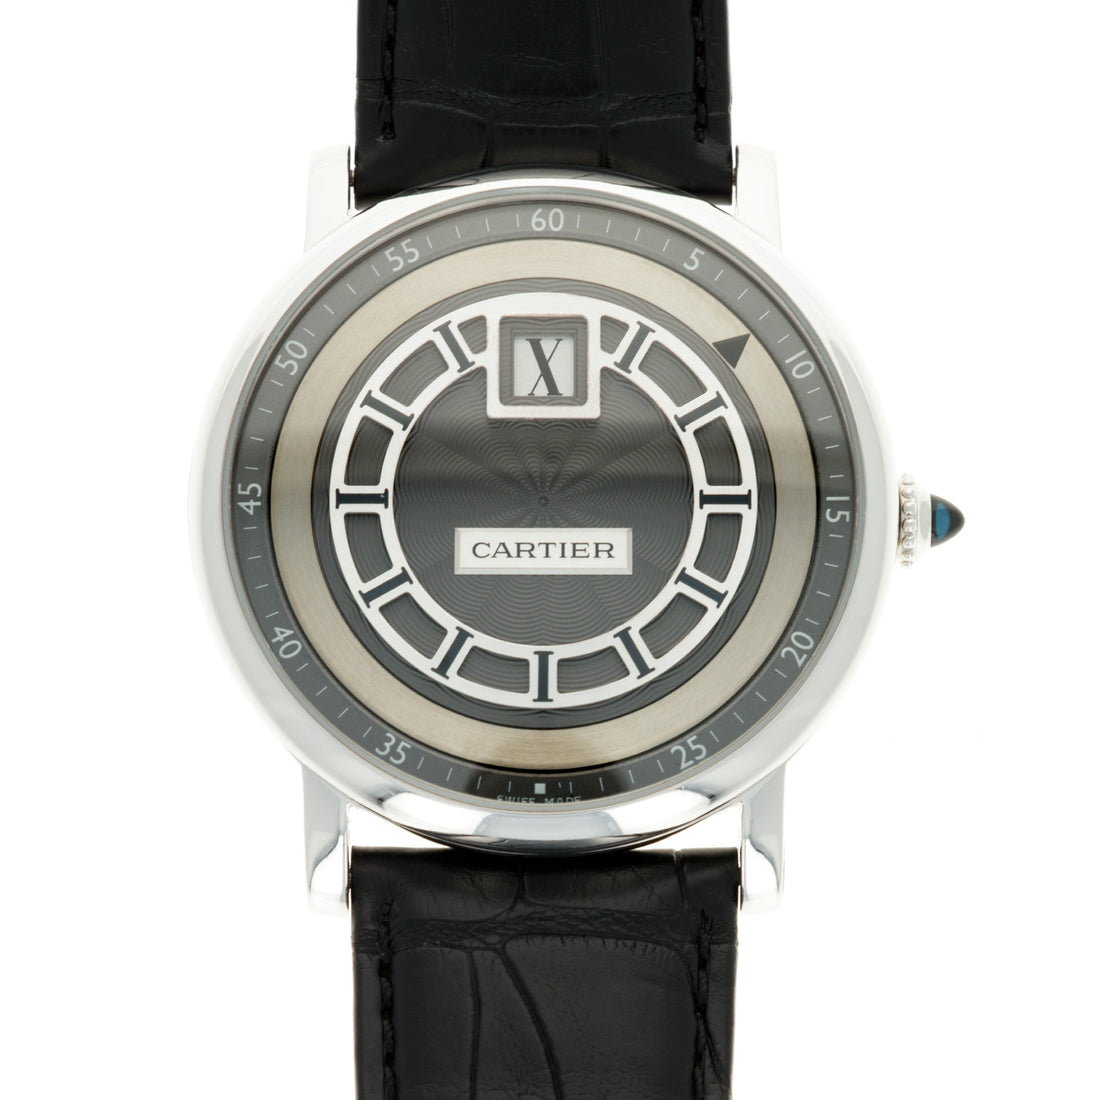 Cartier White Gold Rotonde Jumping Hour Ref. W1553851